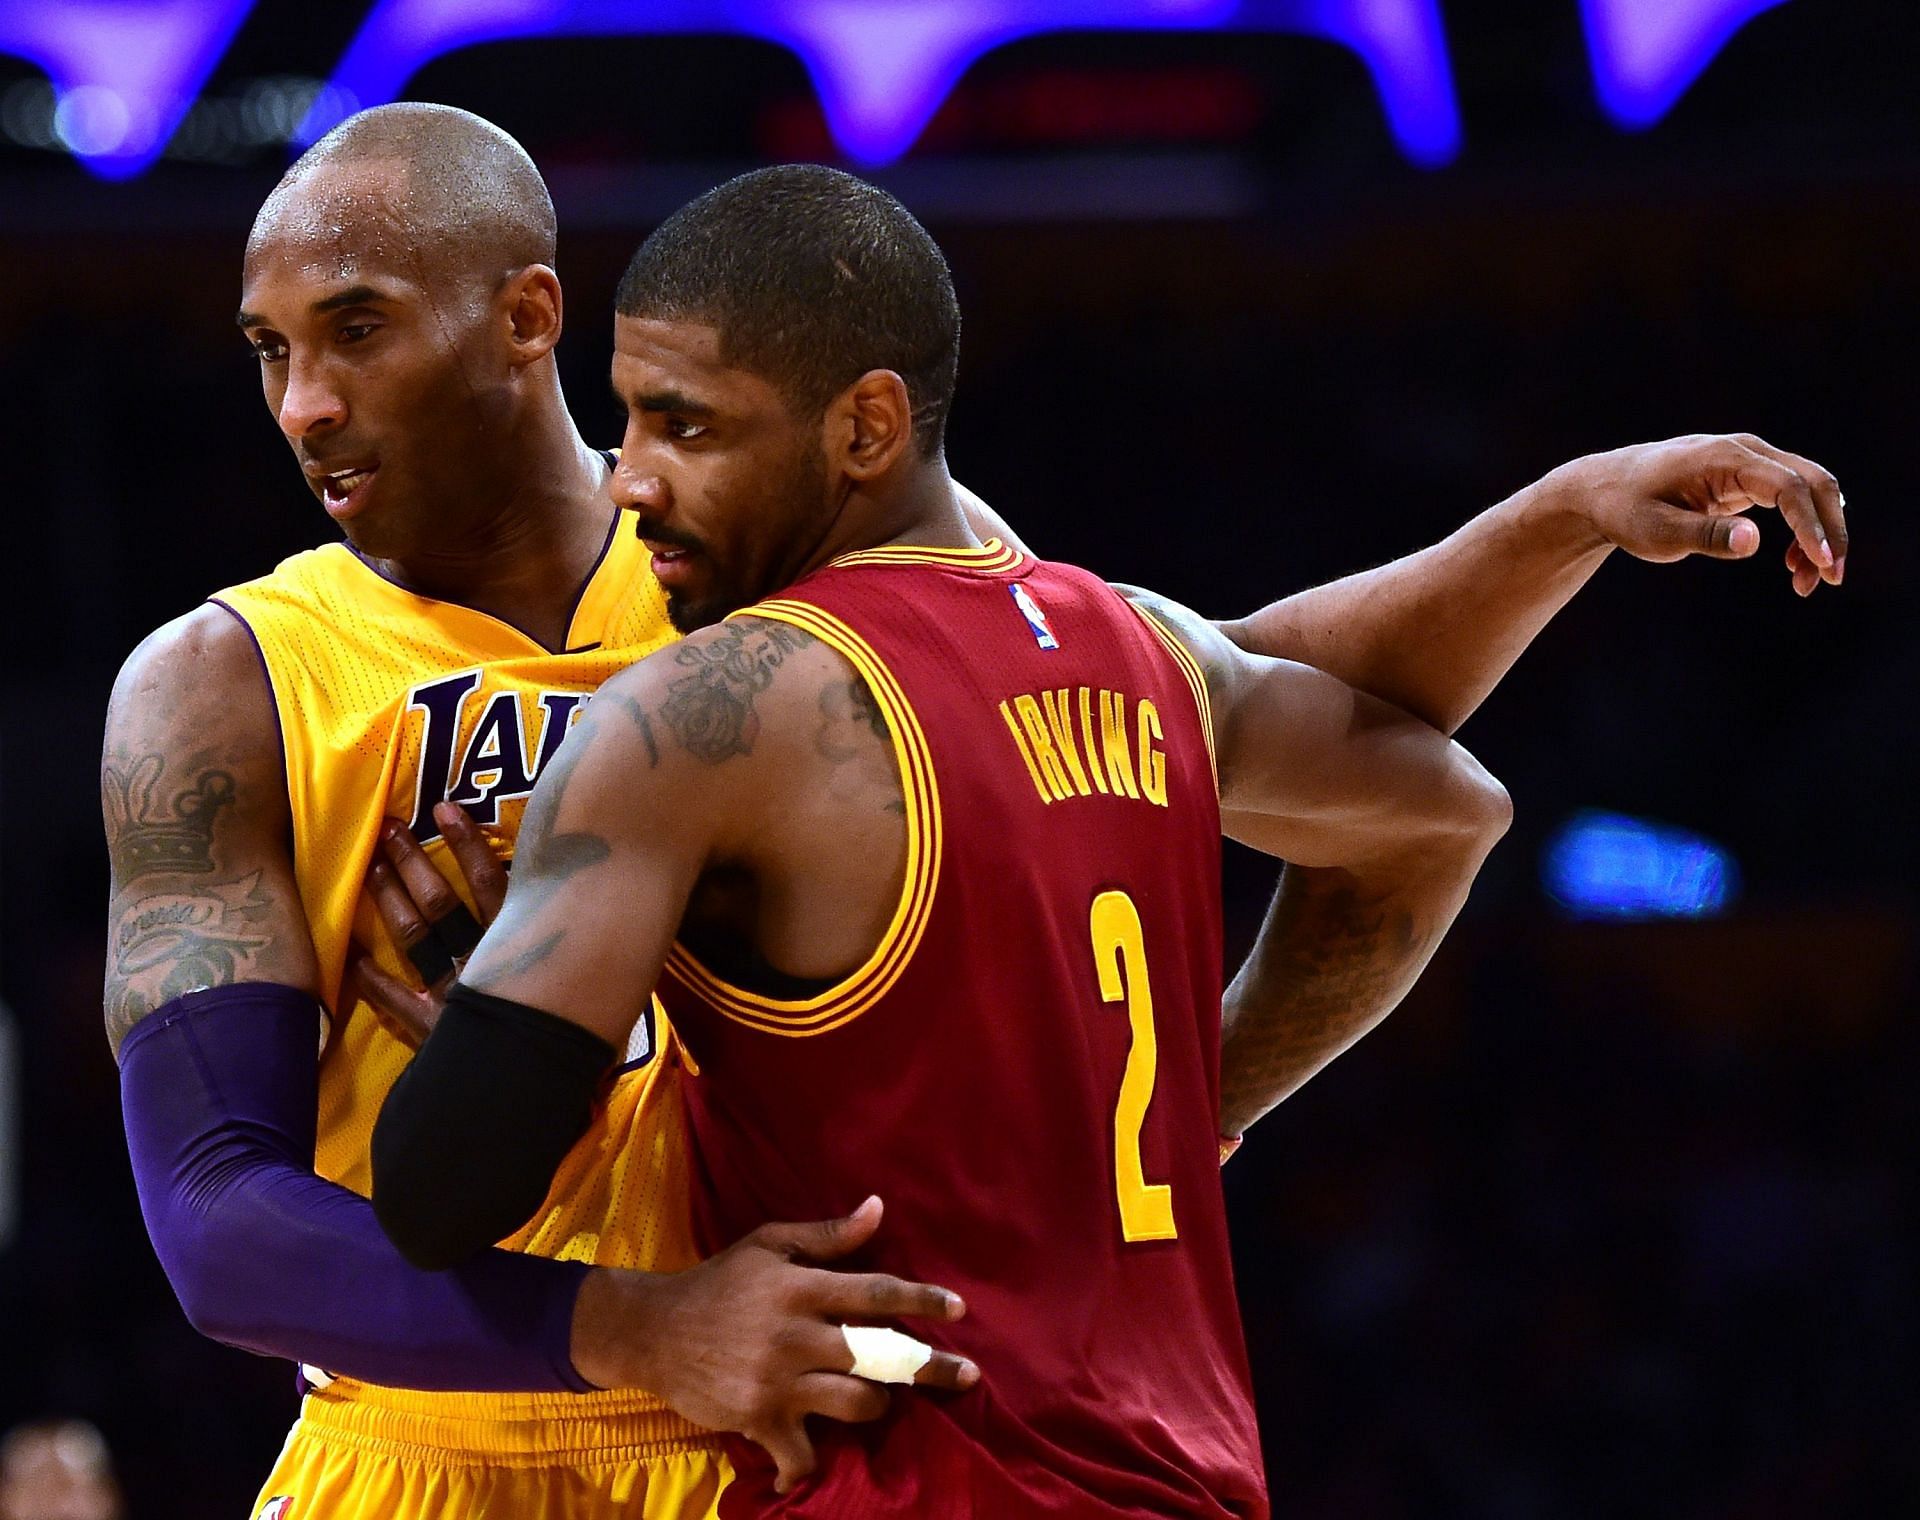 Kyrie Irving Makes a Big Claim About 22YO NBA Star by Drawing Comparisons  to Kobe Bryant: “It's No Coincidence” - EssentiallySports